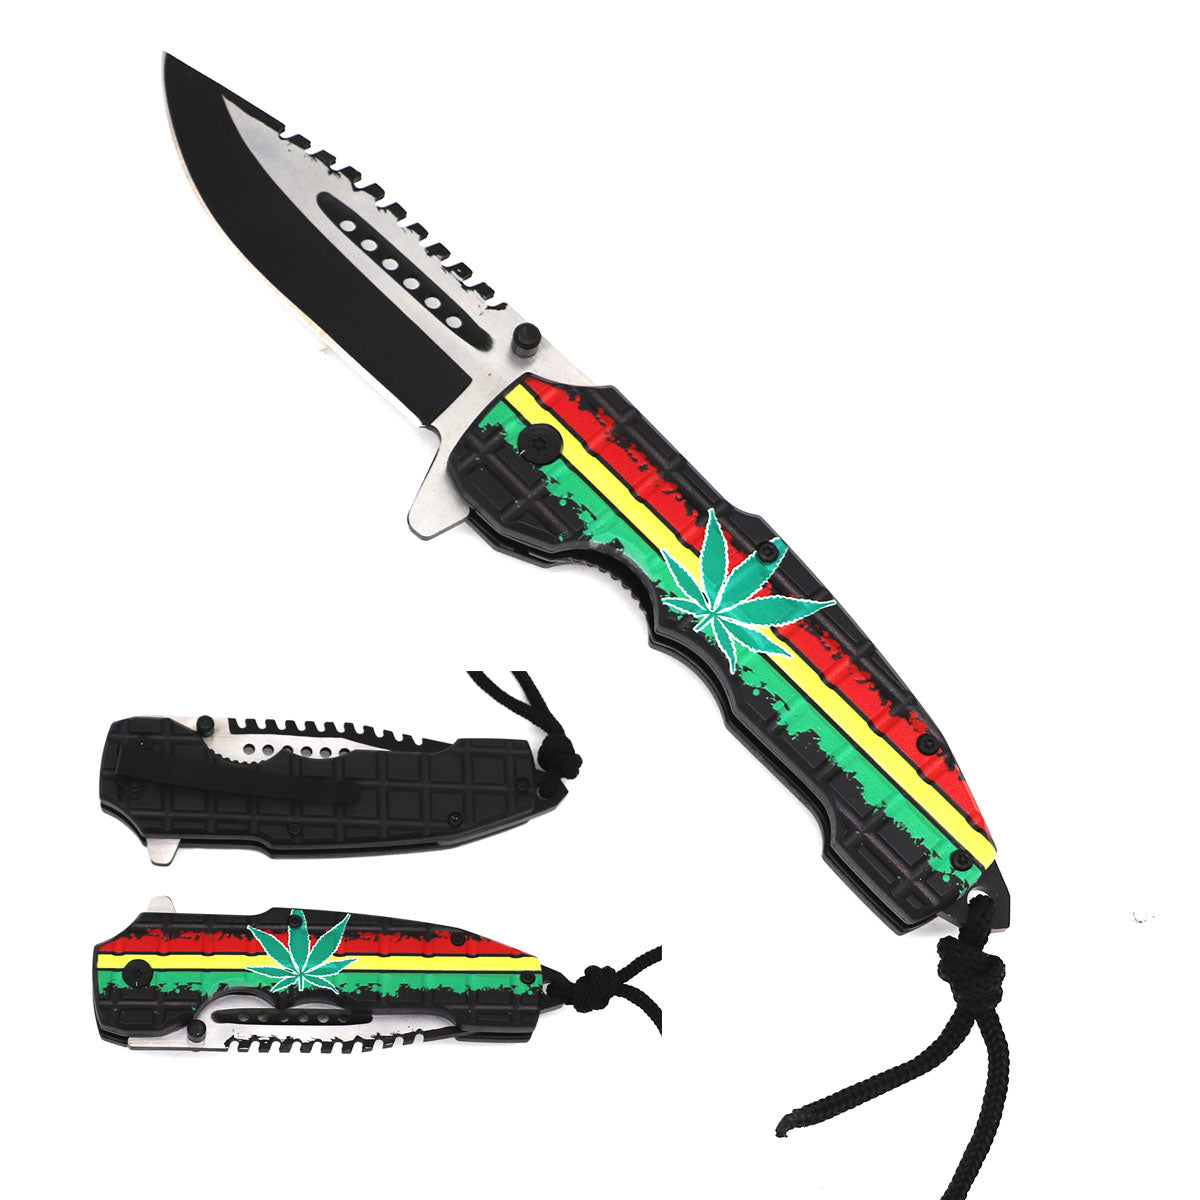 5" Marijuana Leaf Assist-Open Tactical Folding Knife with Paracord